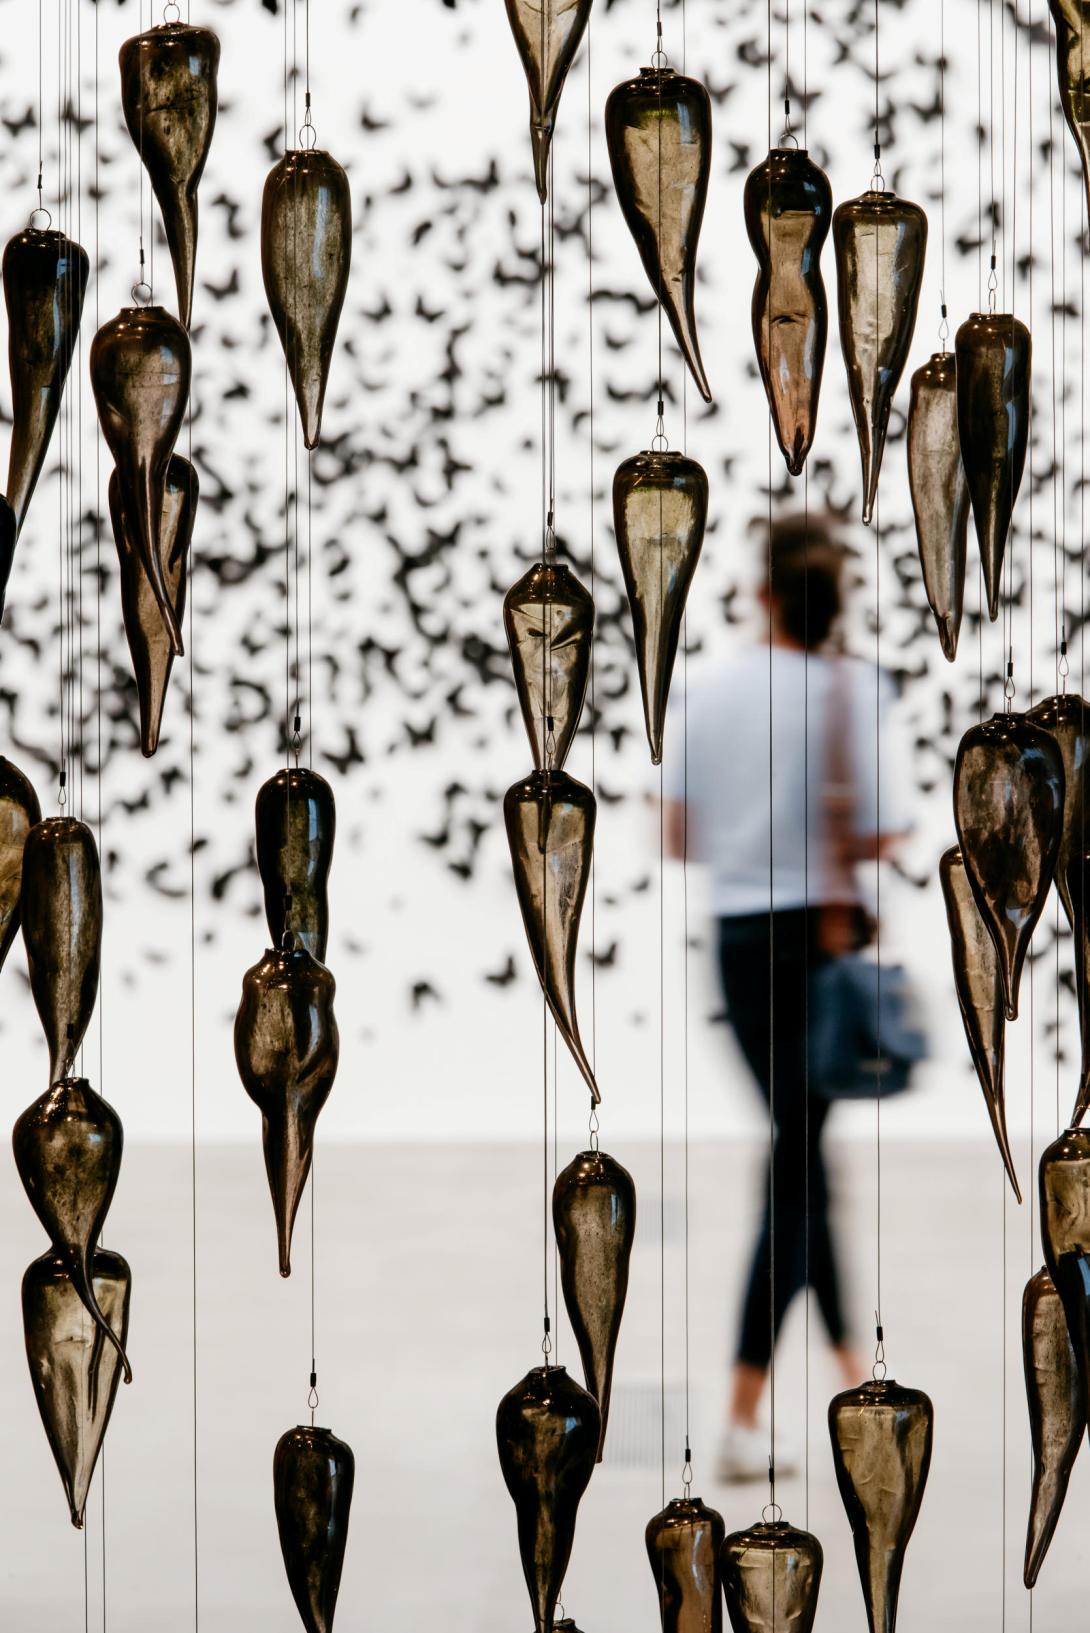 An installation view of a collection of glass sculptures suspended from a gallery ceiling; these sculptures look like little puffs of smoke.